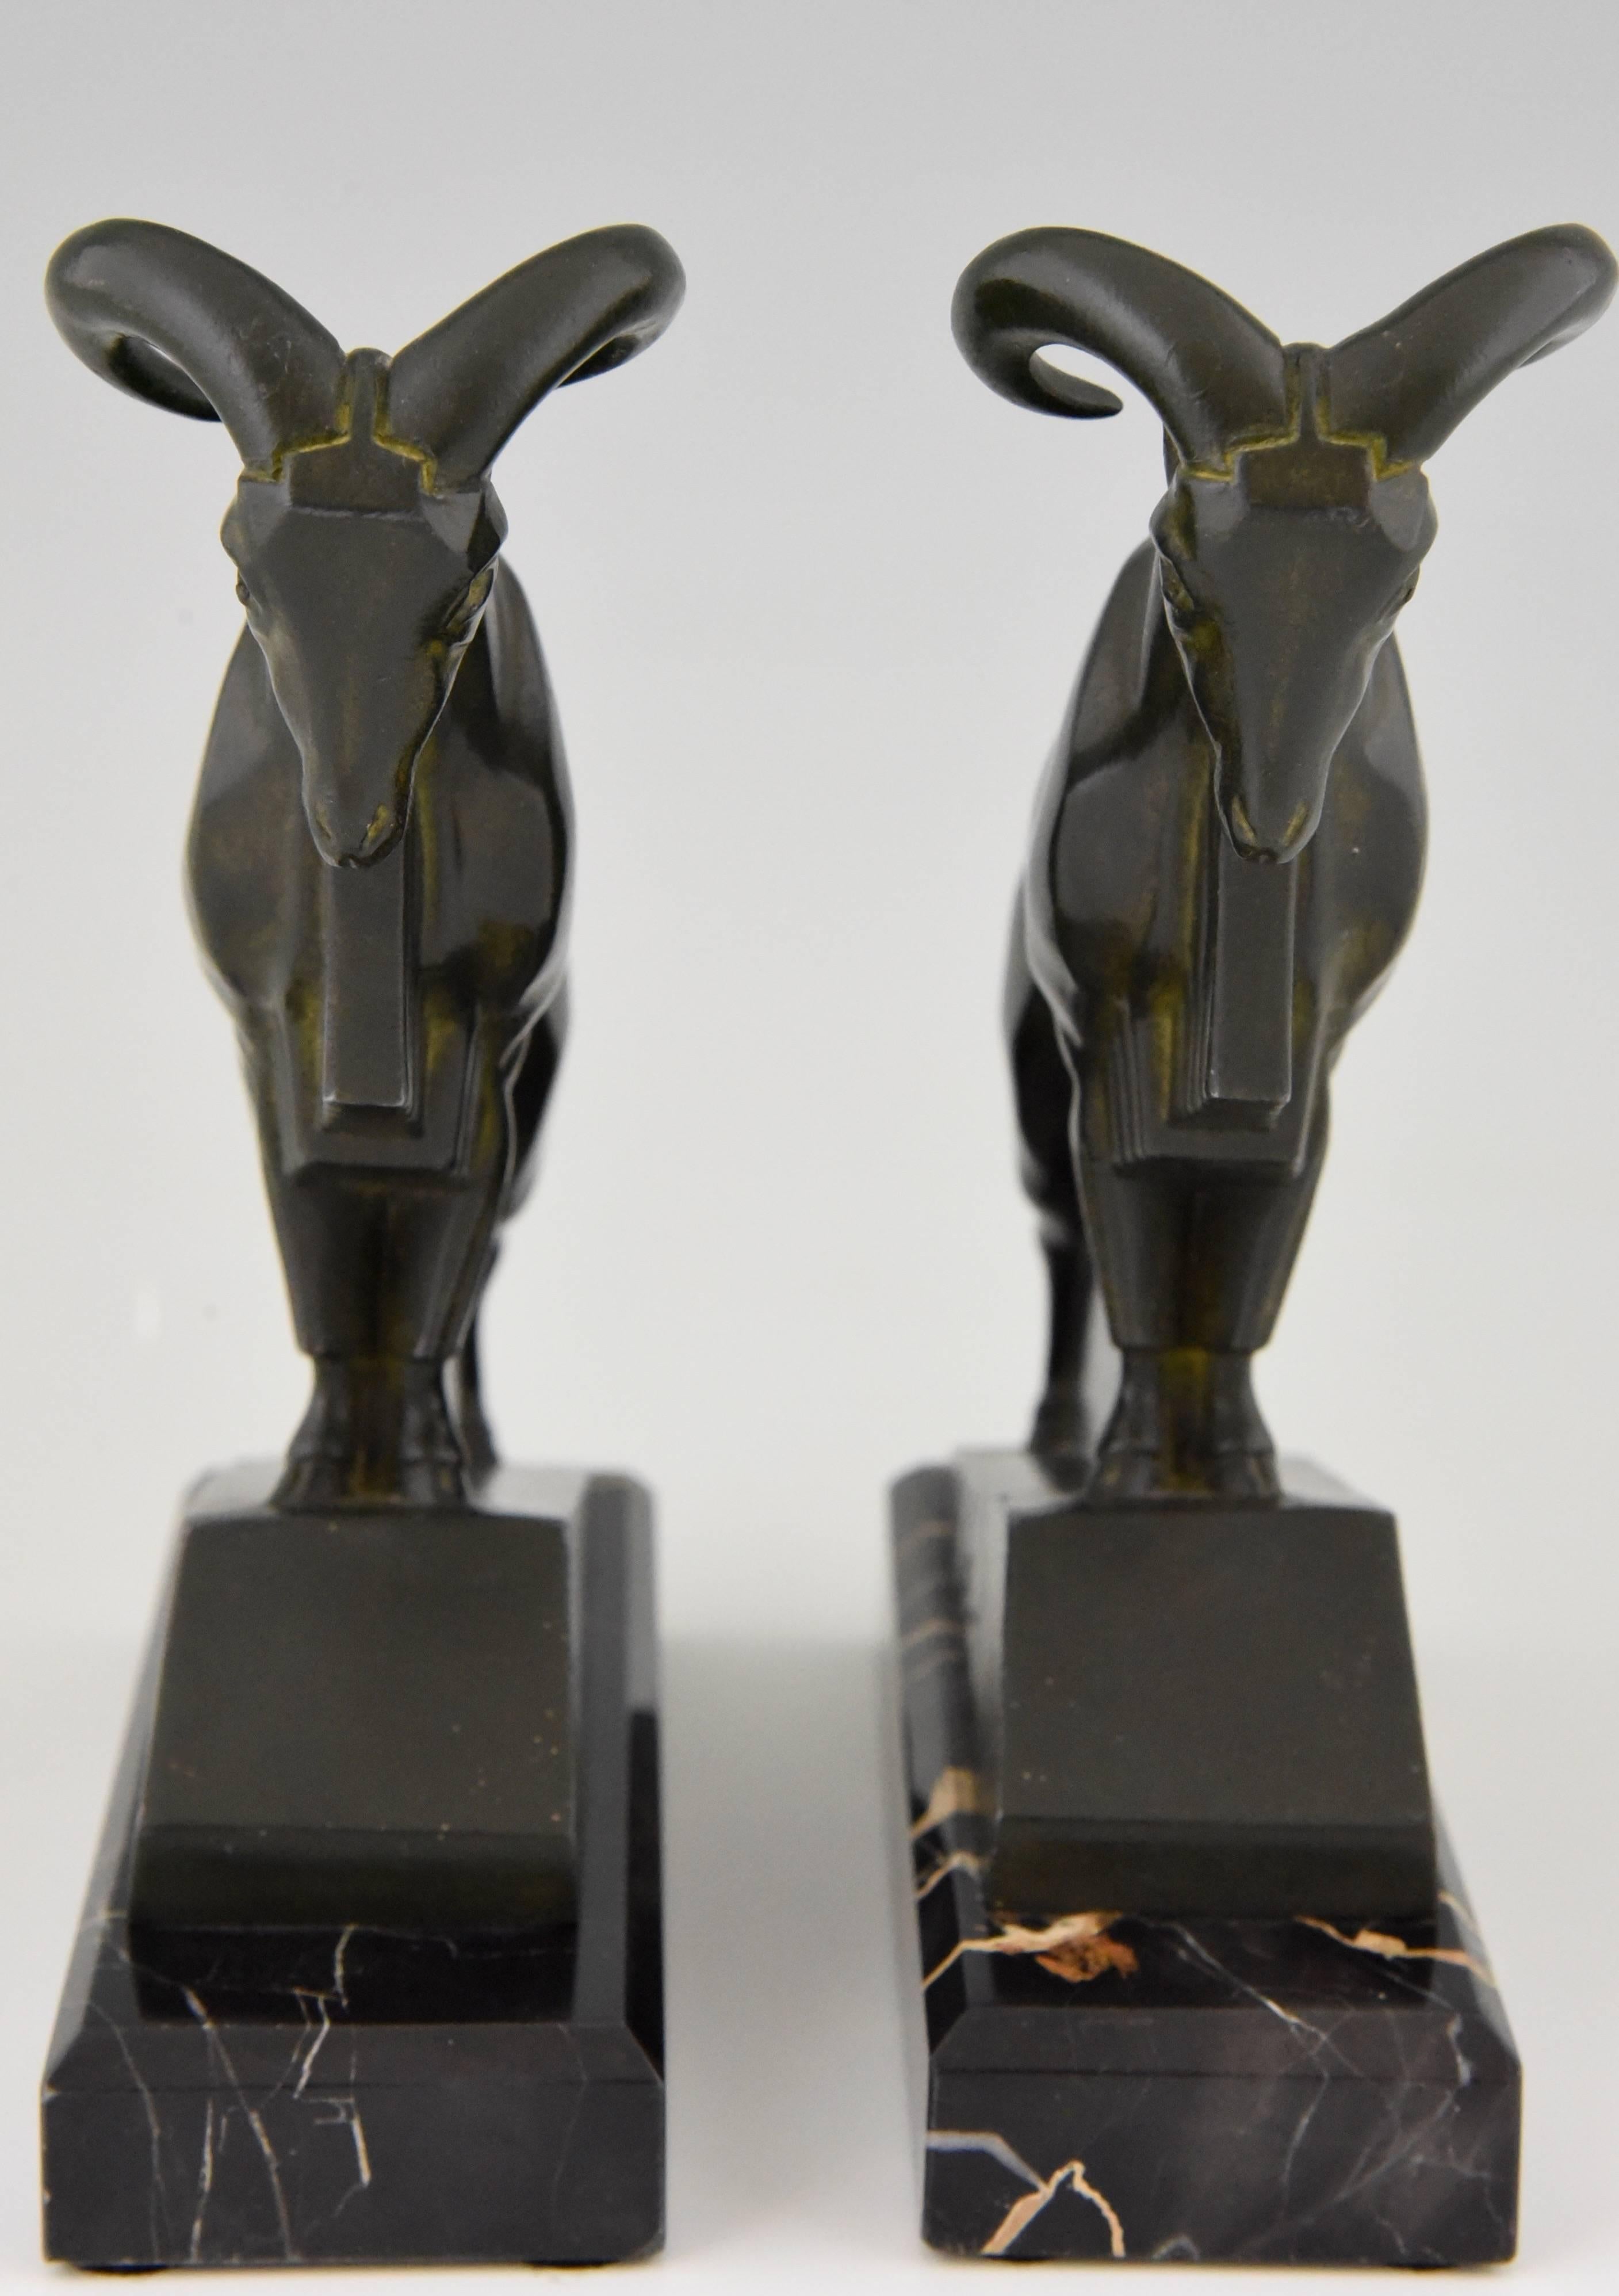 French Art Deco bookends modelled as rams on a portoro marble base signed by Max Le Verrier.

Artist / maker:
Max Le Verrier.
Signature / marks:
M. Le Verrier. 
Style:
Art Deco. 
Date:
1930.
Material:
Green patinated metal.  Portor marble